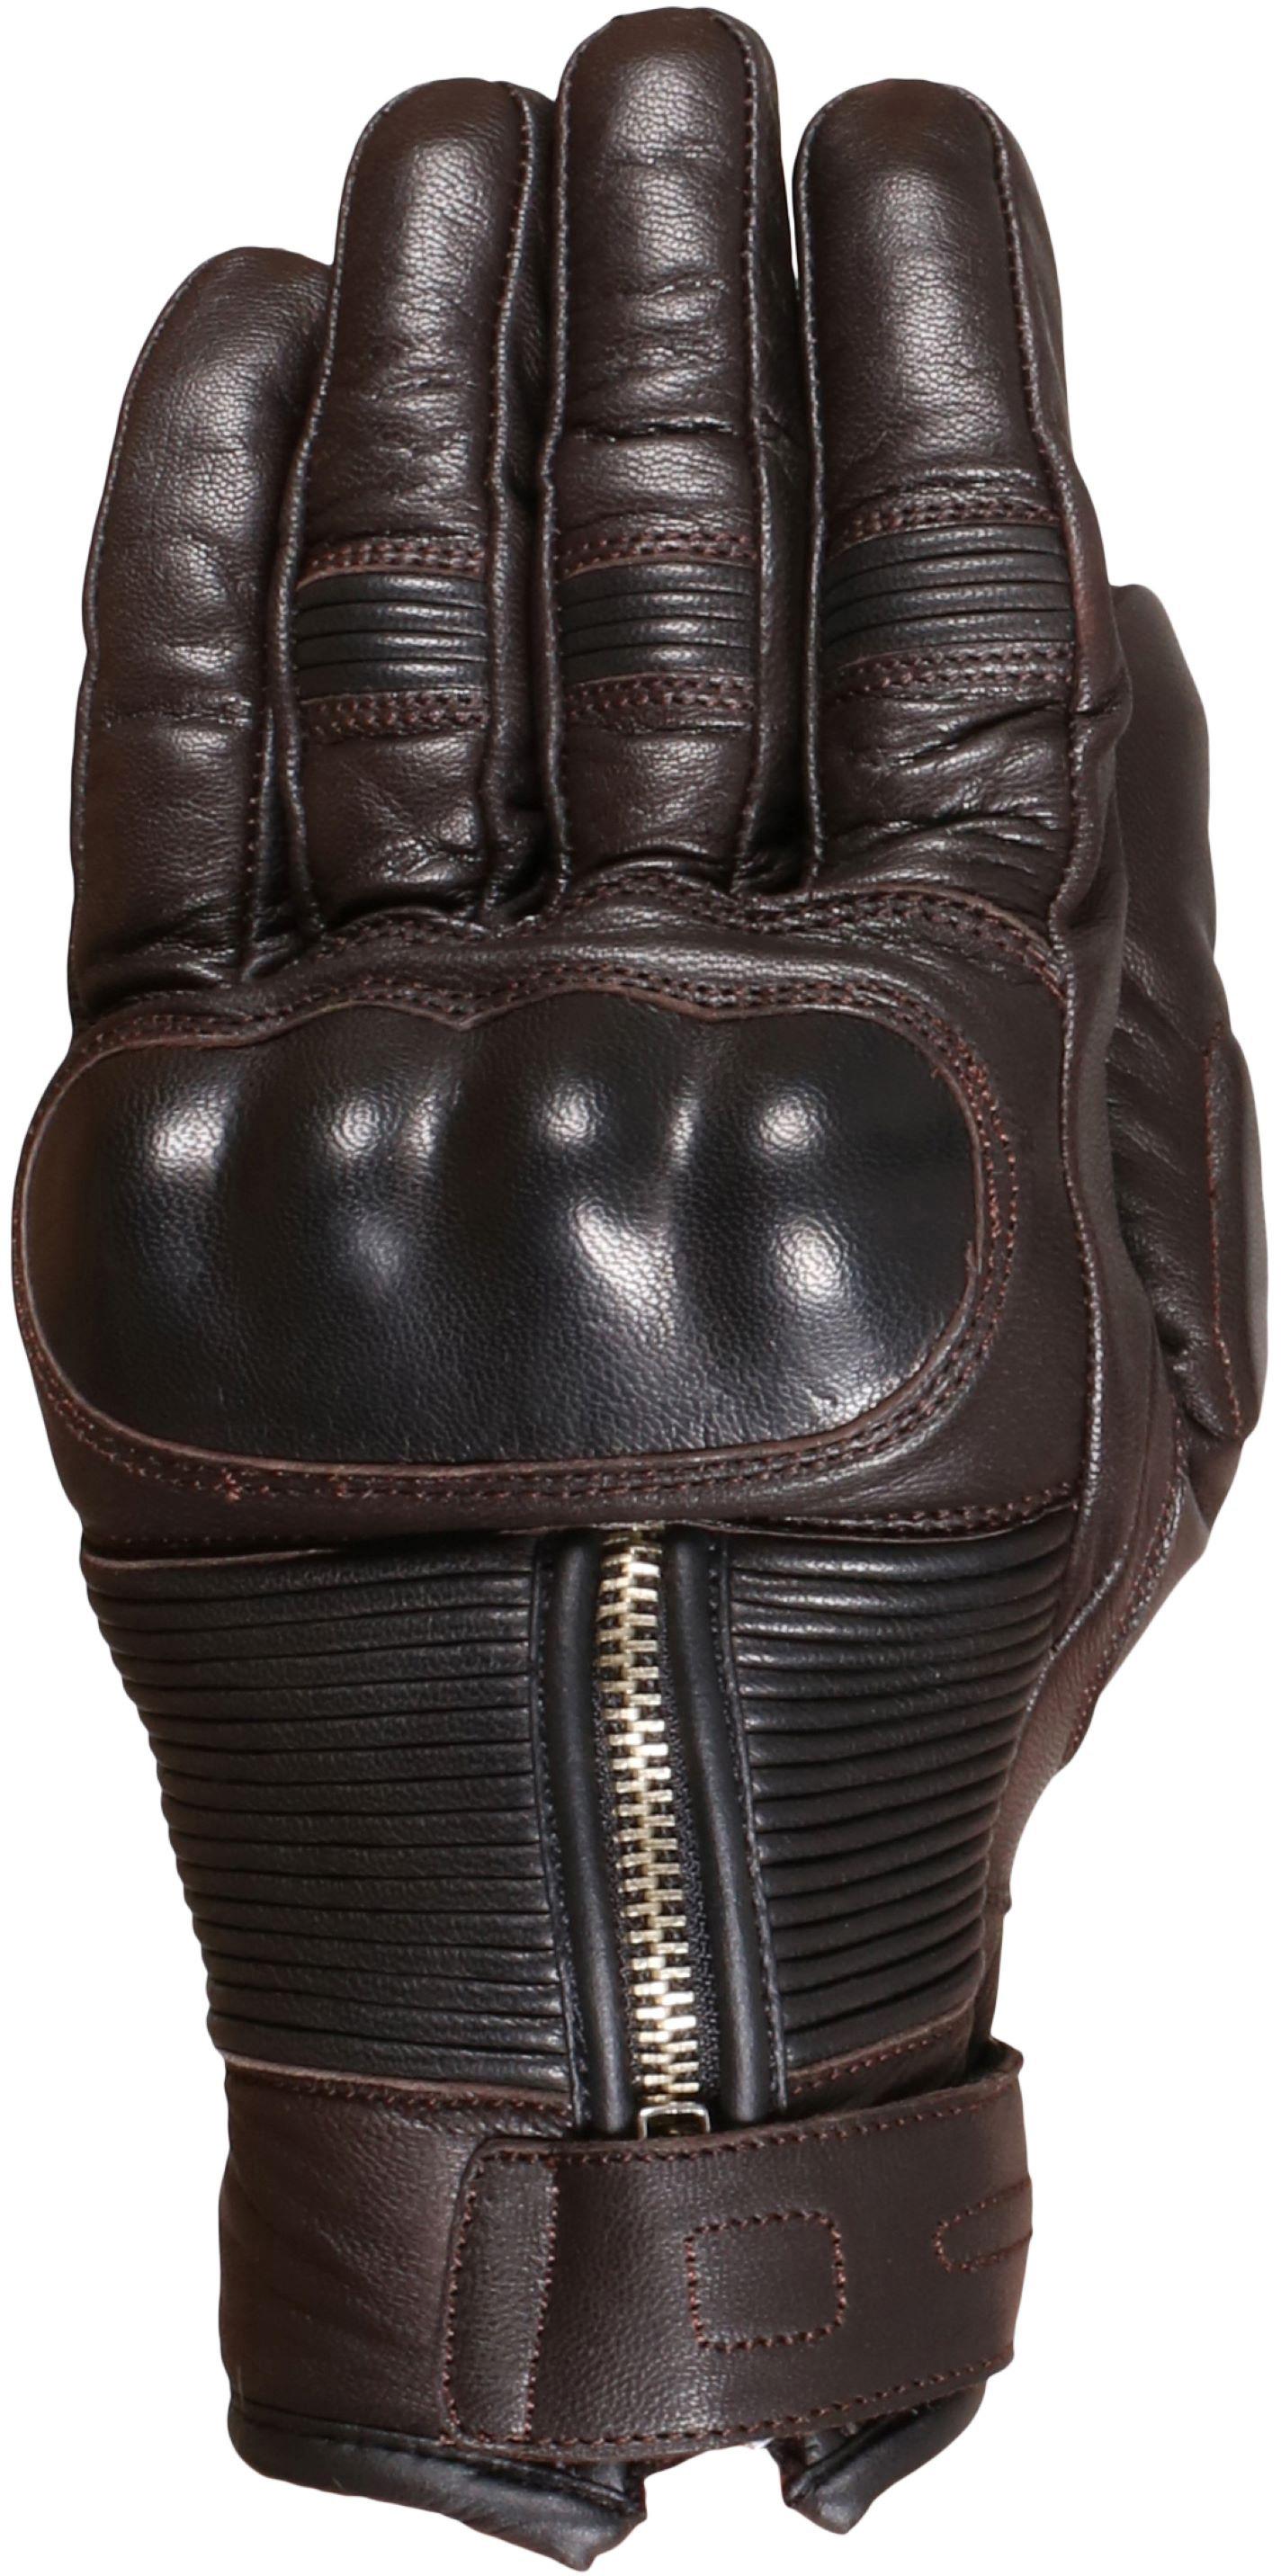 Weise Union Motorcycle Gloves - Brown, 2Xl